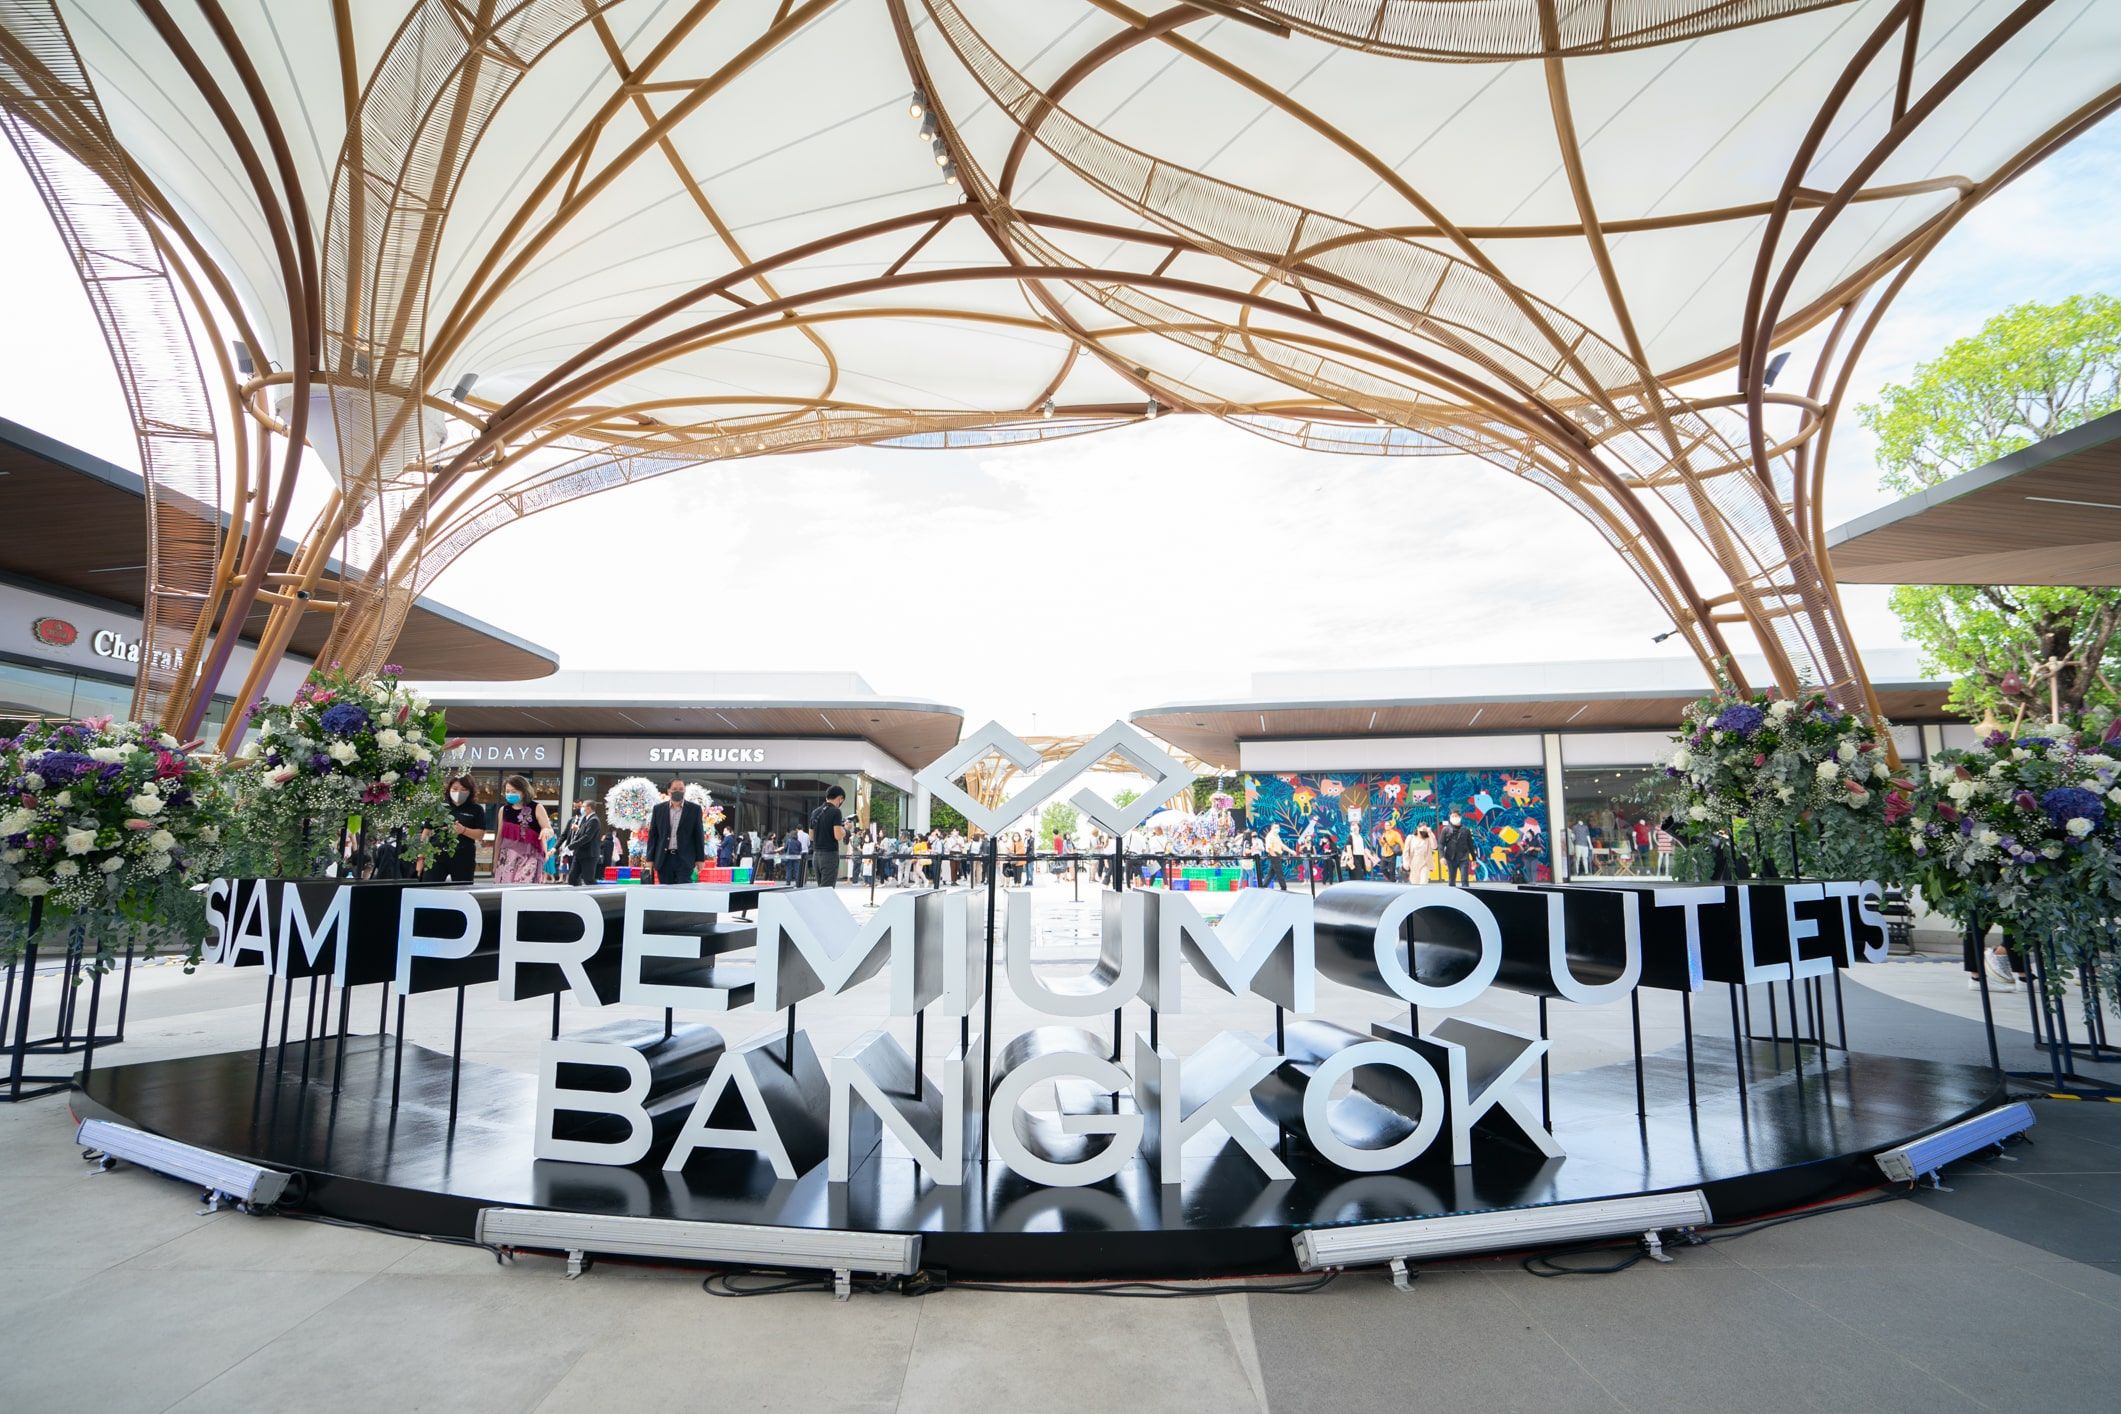 SIAM PREMIUM OUTLETS® BANGKOK ANNOUNCES OPENING BRINGING WORLD'S